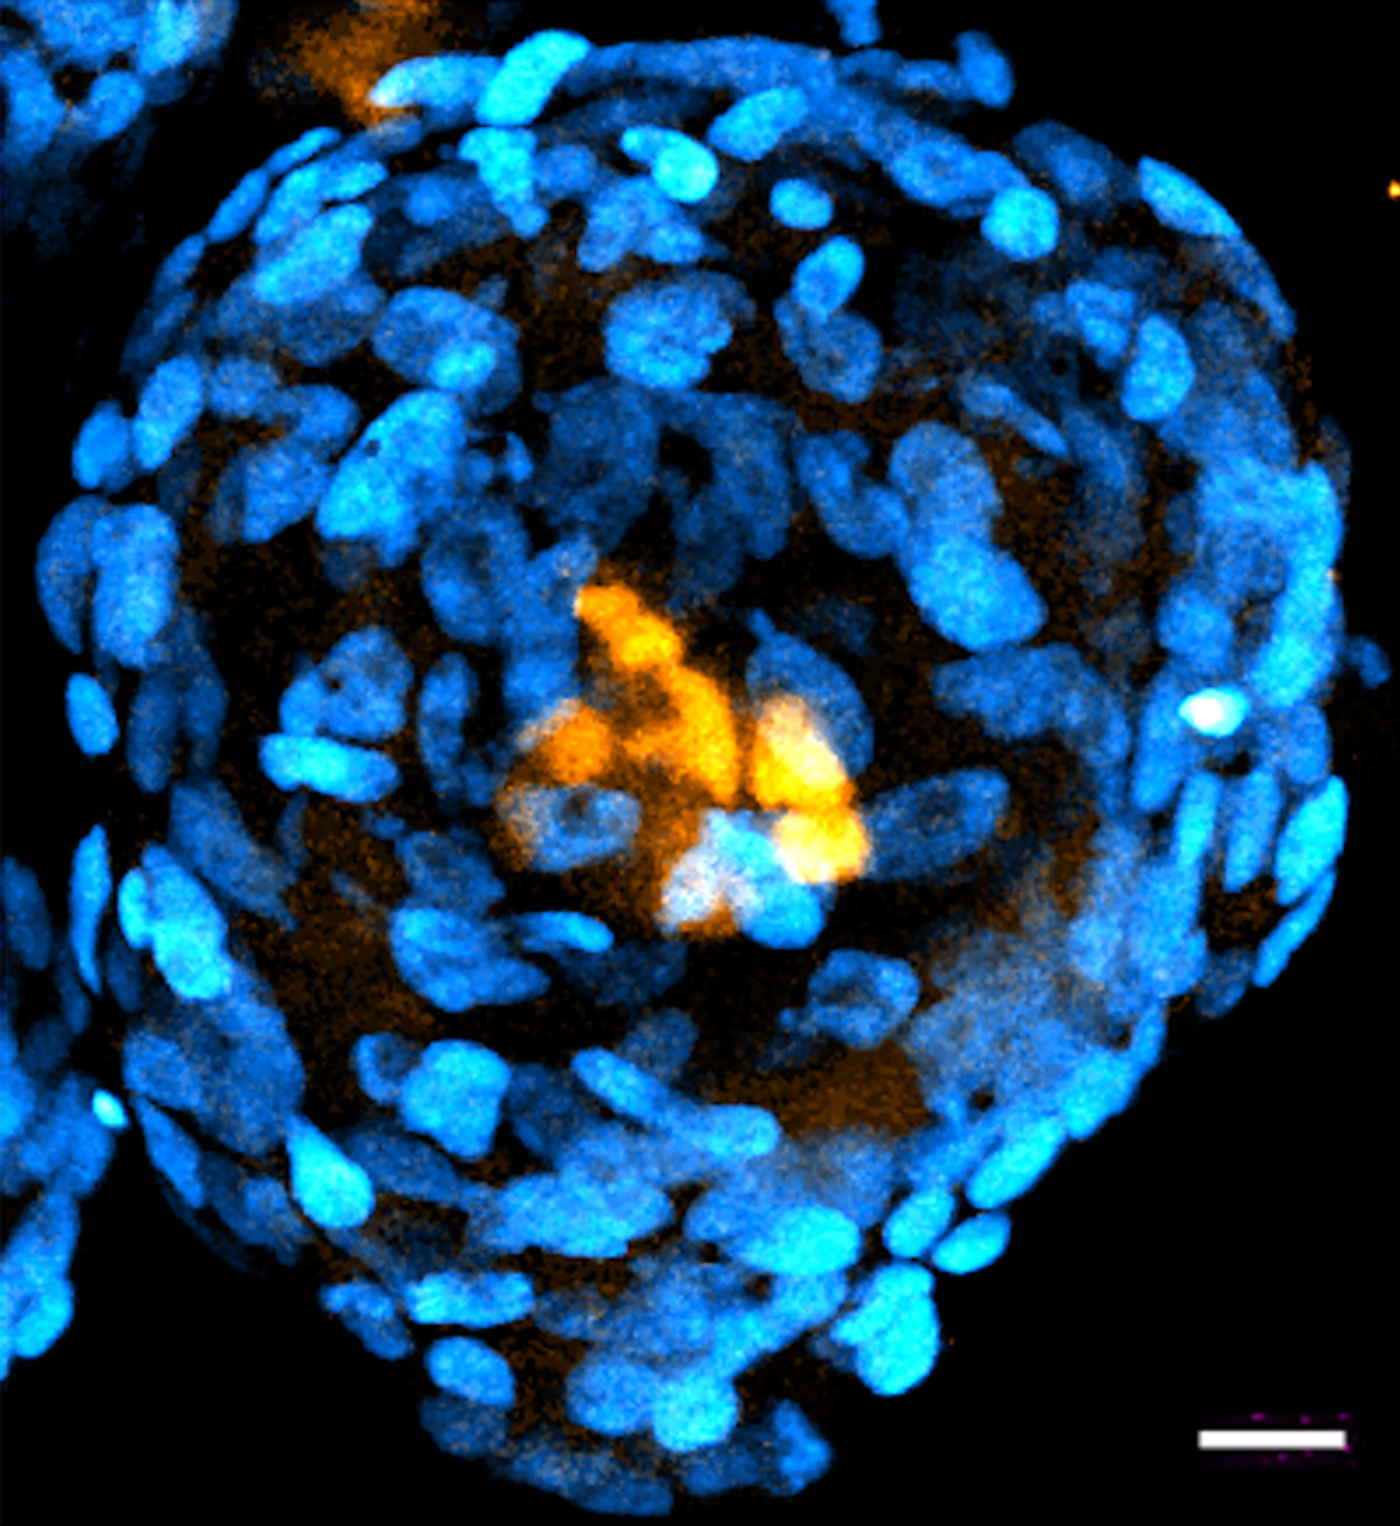 Structure generated entirely from human stem cells that closely mimics morphology of the human embryo. / Credit: Sozen & Jorgensen et al., Nature Communications (2021)